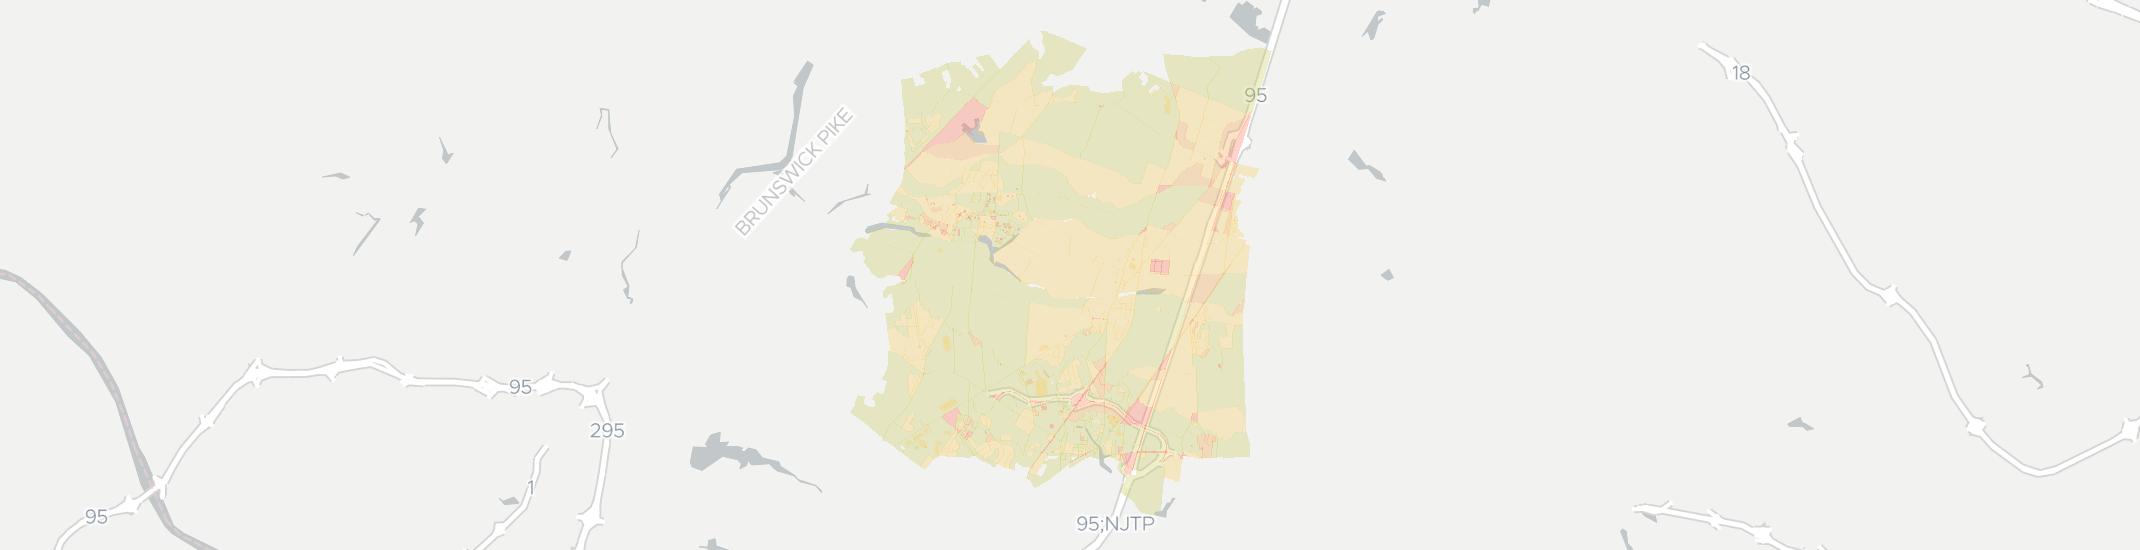 Cranbury Internet Competition Map. Click for interactive map.